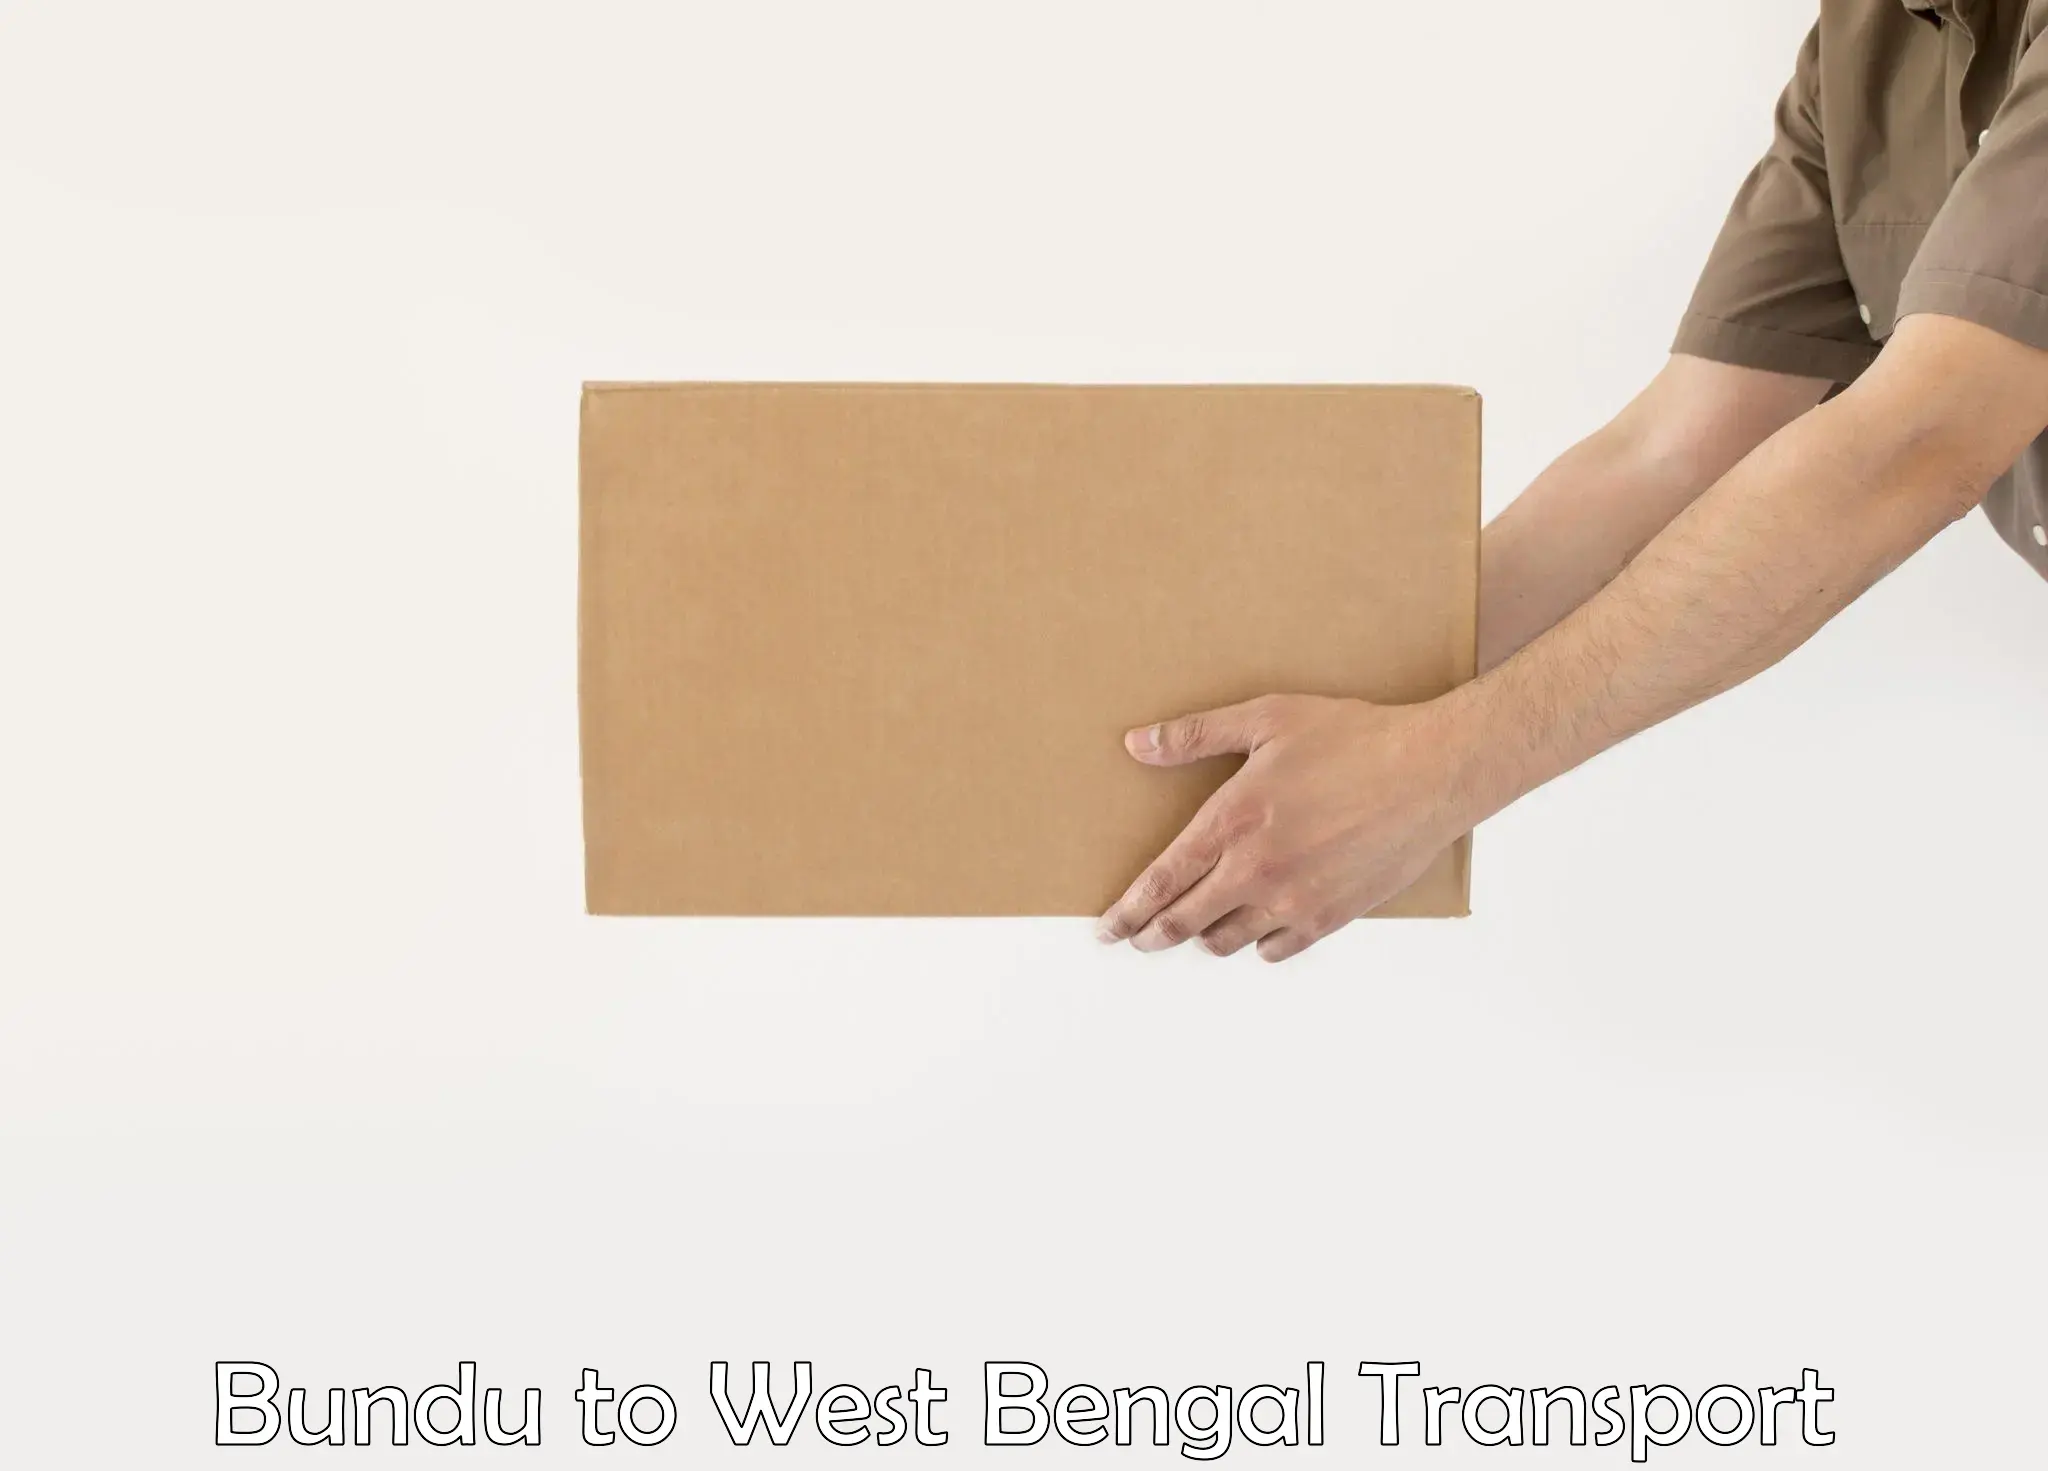 Road transport services in Bundu to West Bengal